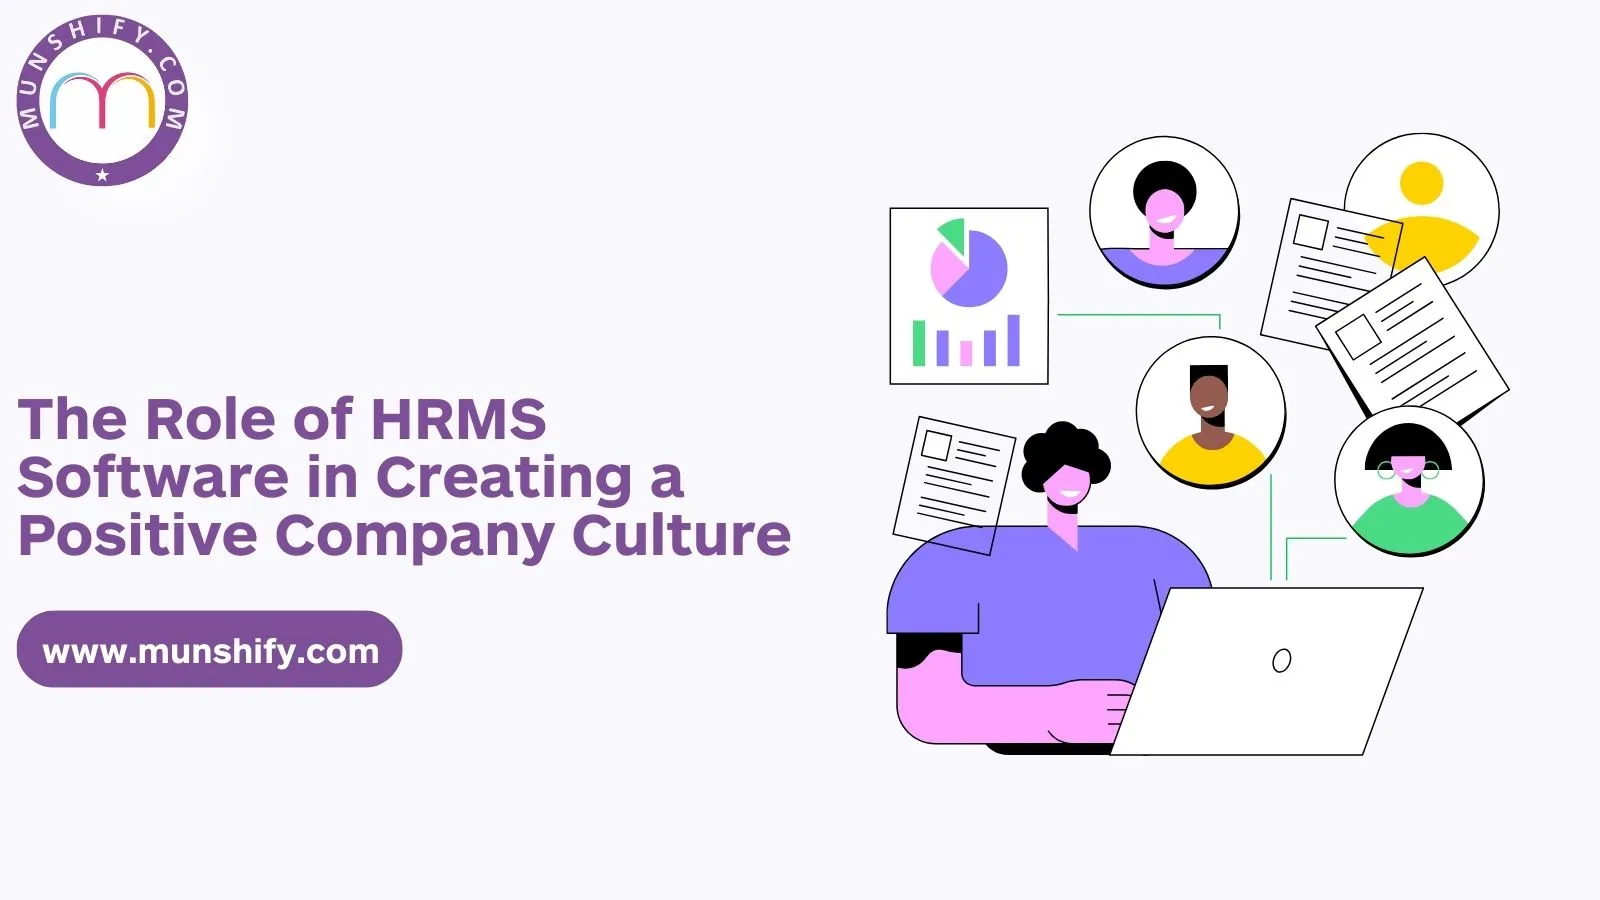 The Role of HRMS Software in Creating a Positive Company Culture